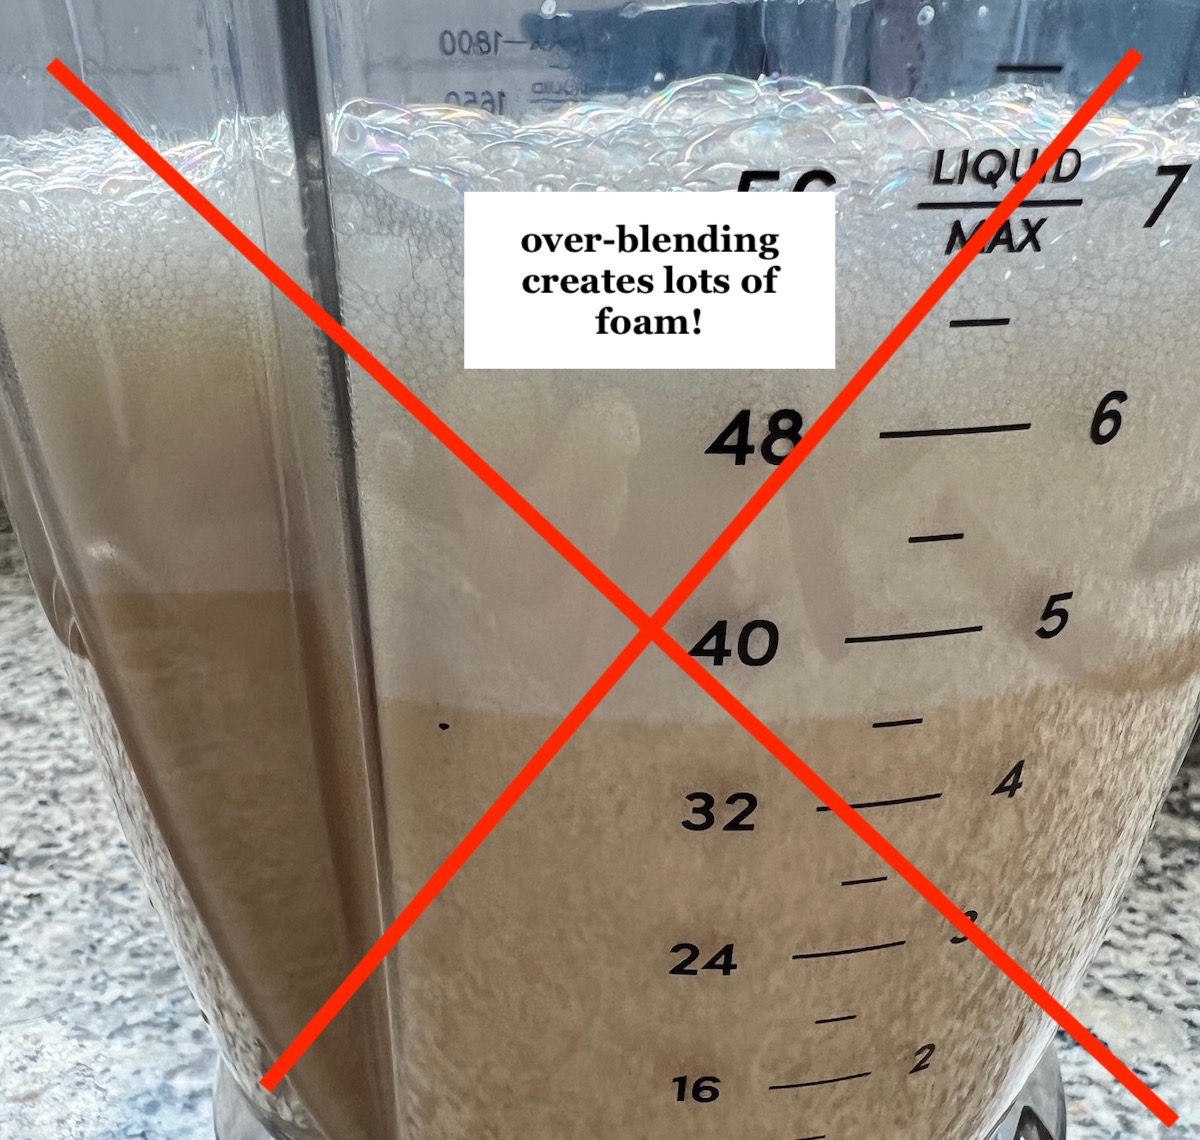 Picture of blender with custard that has lots of foam because it was over-blended for Brazilian Flan recipe. A red X is over the image with a note that says 'over-blending creates tons of foam'.